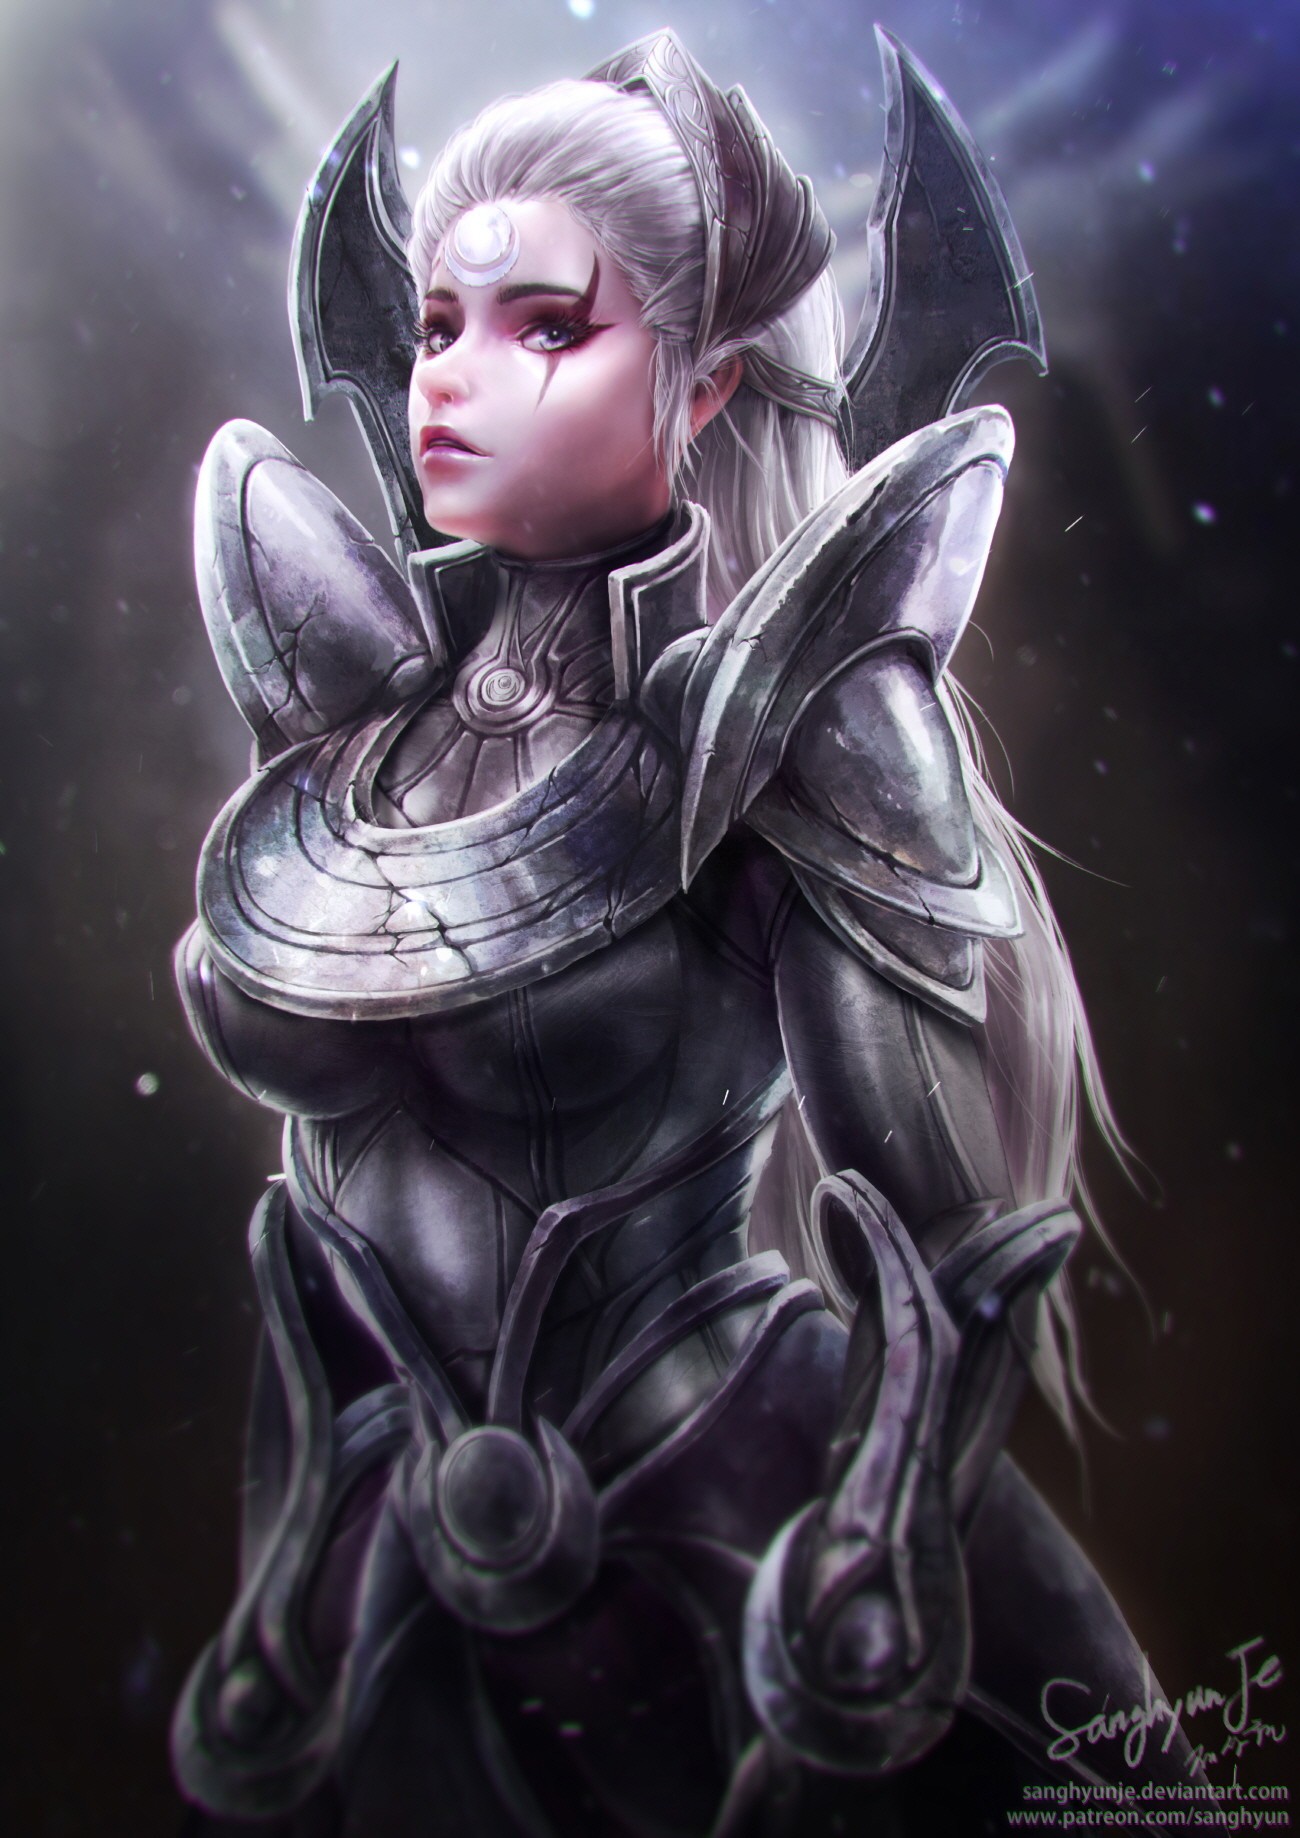 General 1300x1838 video games League of Legends Diana (League of Legends) women video game girls PC gaming DeviantArt fantasy armor armor video game characters